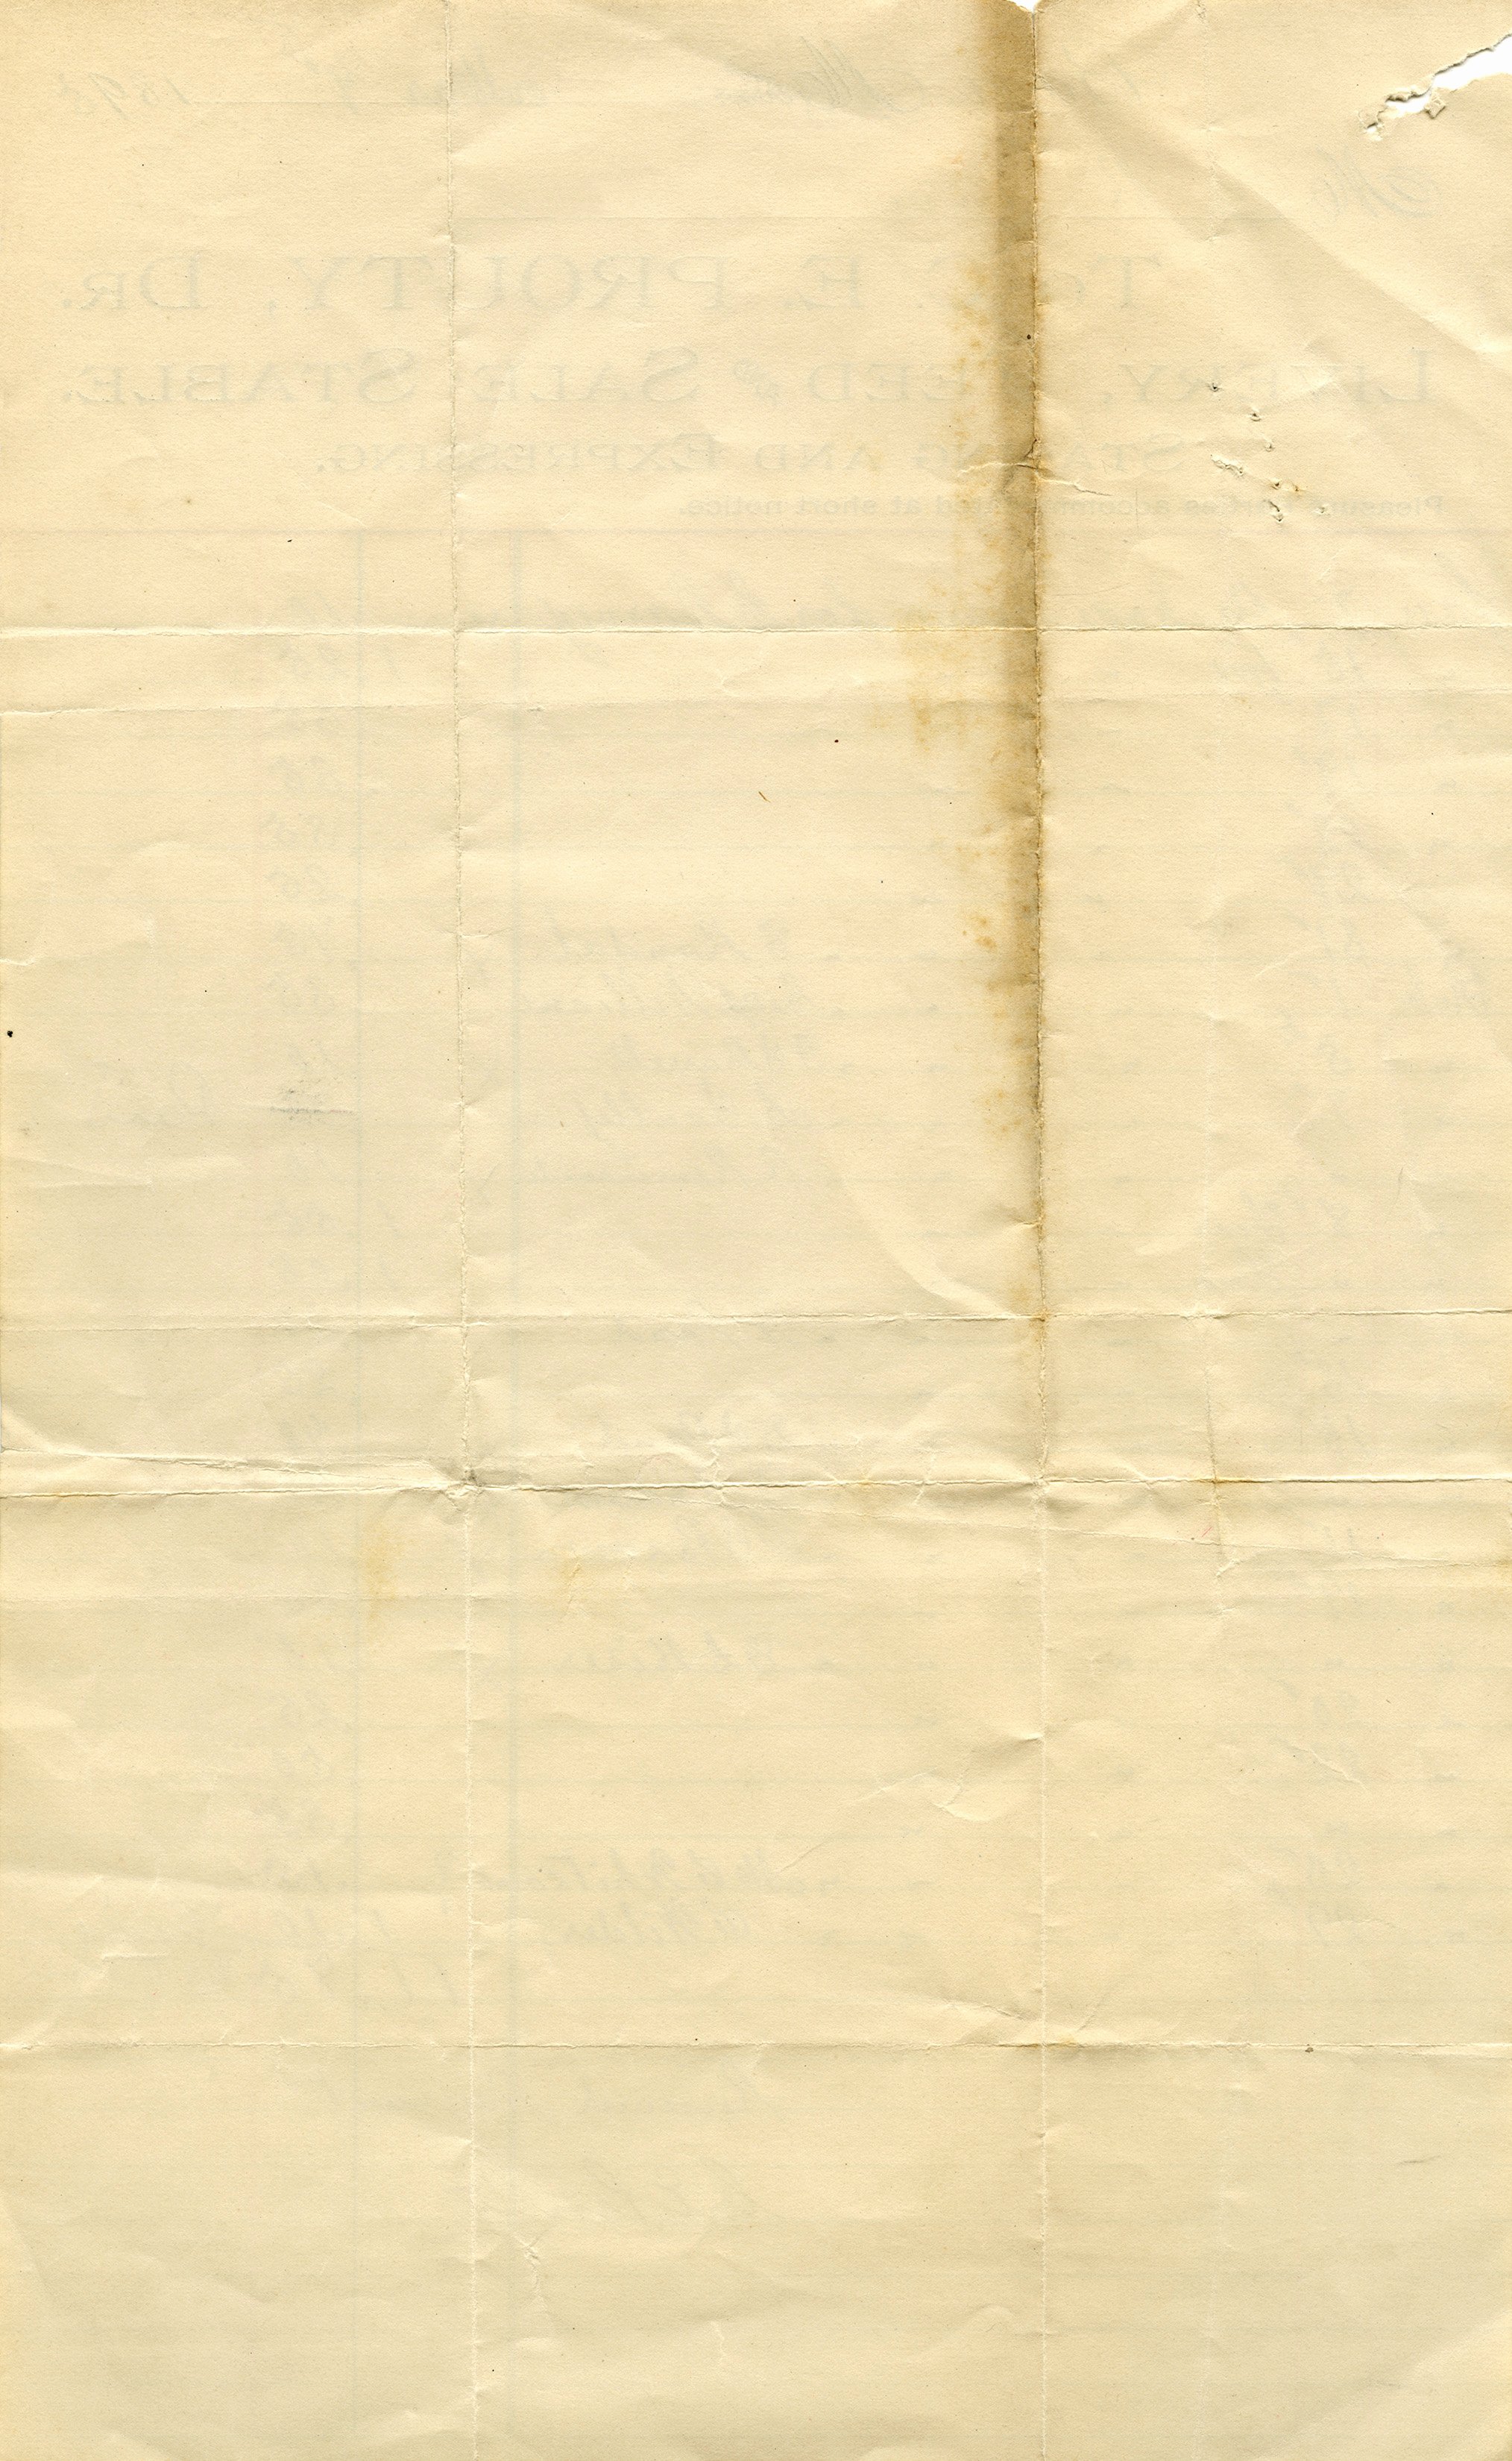 Old Paper Texture Free Lovely Free Vintage Image Grungy Old Paper Texture Old Design